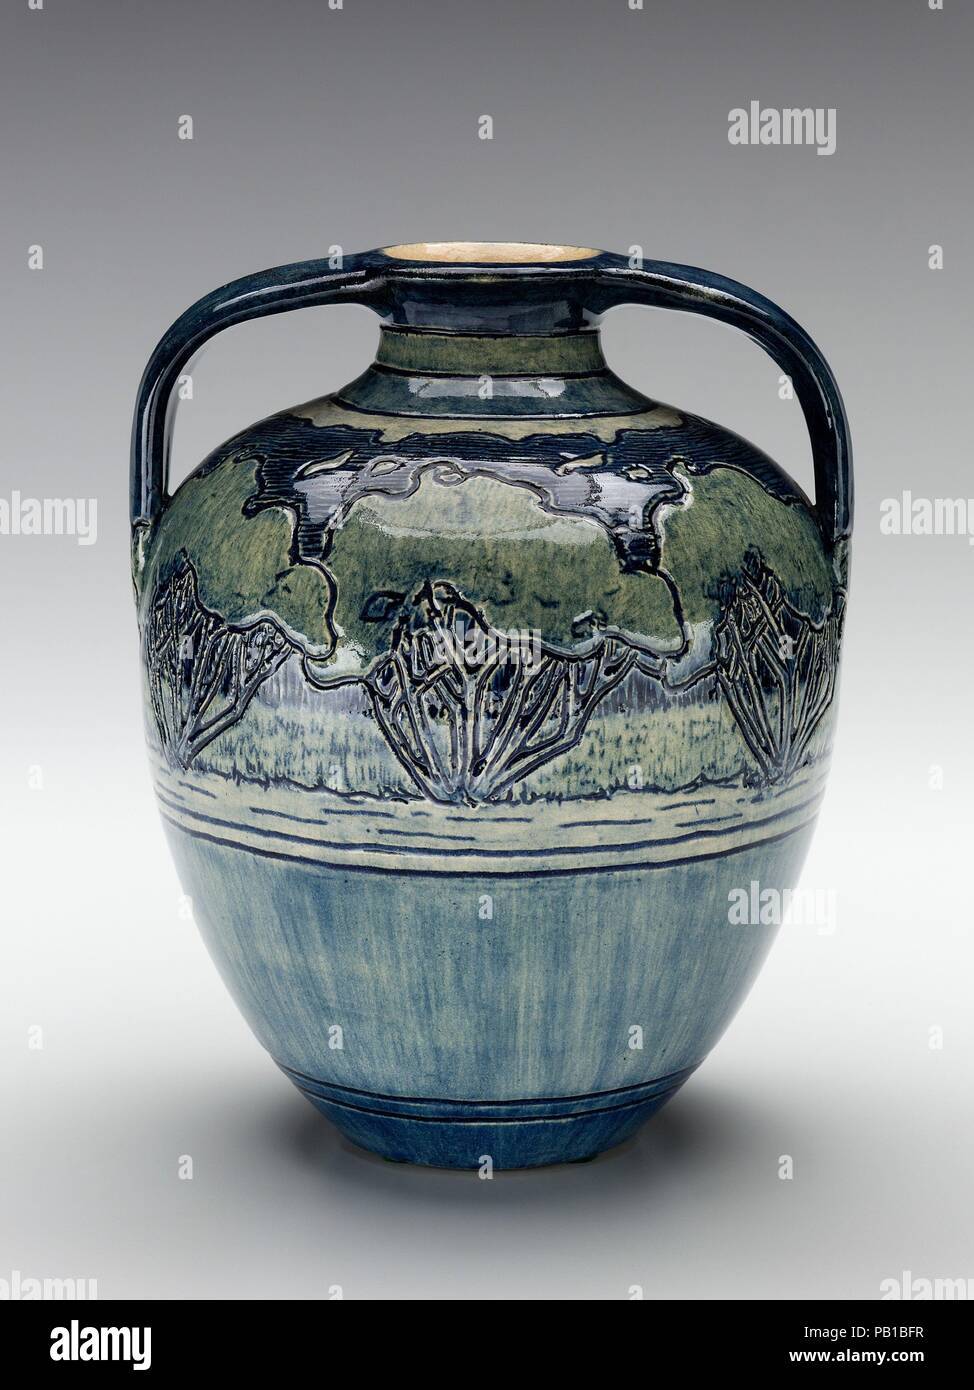 Vase. Culture: American. Dimensions: 8 7/8 x 7 1/8 in. (22.5 x 18.1 cm). Maker: Decorated by Mary Frances Baker (1879-1943). Manufacturer: Newcomb Pottery (1894-1940). Date: 1906.  Newcomb College of New Orleans is one of the earliest educational institutions to be associated with the Arts and Crafts Movement. It shared many of the movement's concerns, such as creating opportunities for women in the arts. It was the brainchild of Ellsworth Woodworth, who taught drawing and painting at Newcomb, and his brother William Woodward, a professor at Tulane University, who was especially interested in  Stock Photo